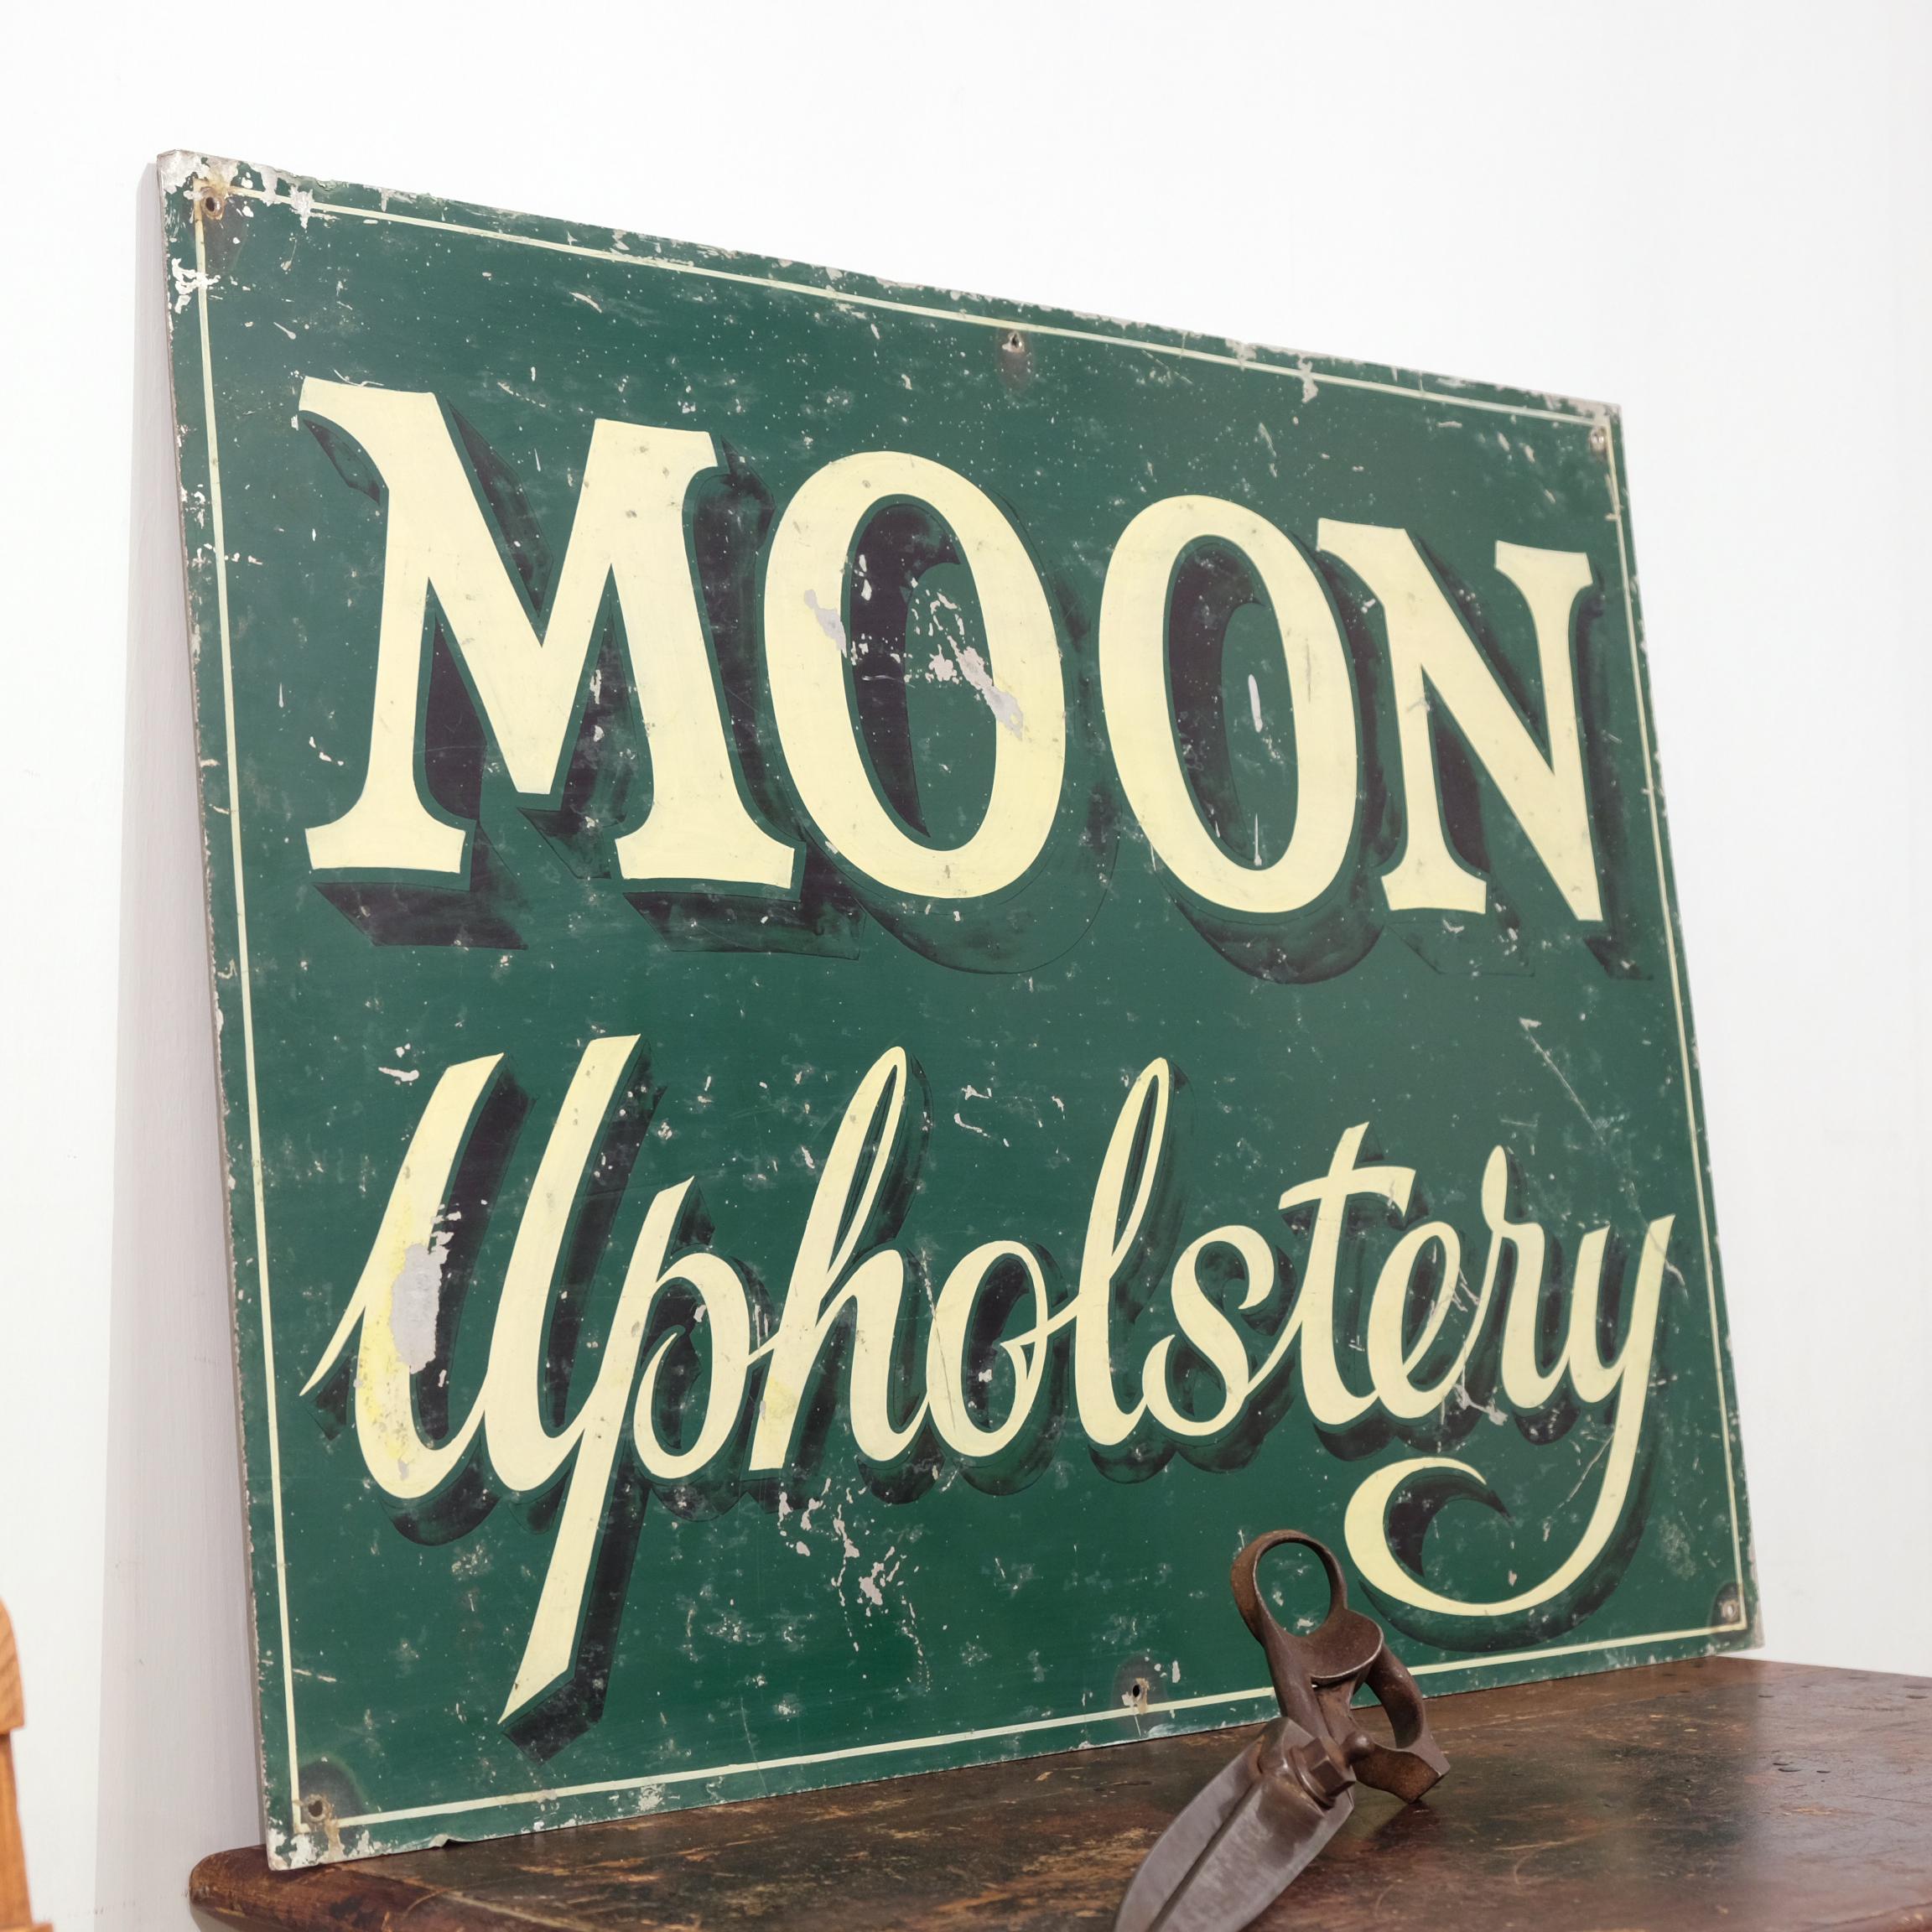 English Mid-20th Century Hand Painted Metal Trade Sign, Cream on Green 'Moon Upholstery'